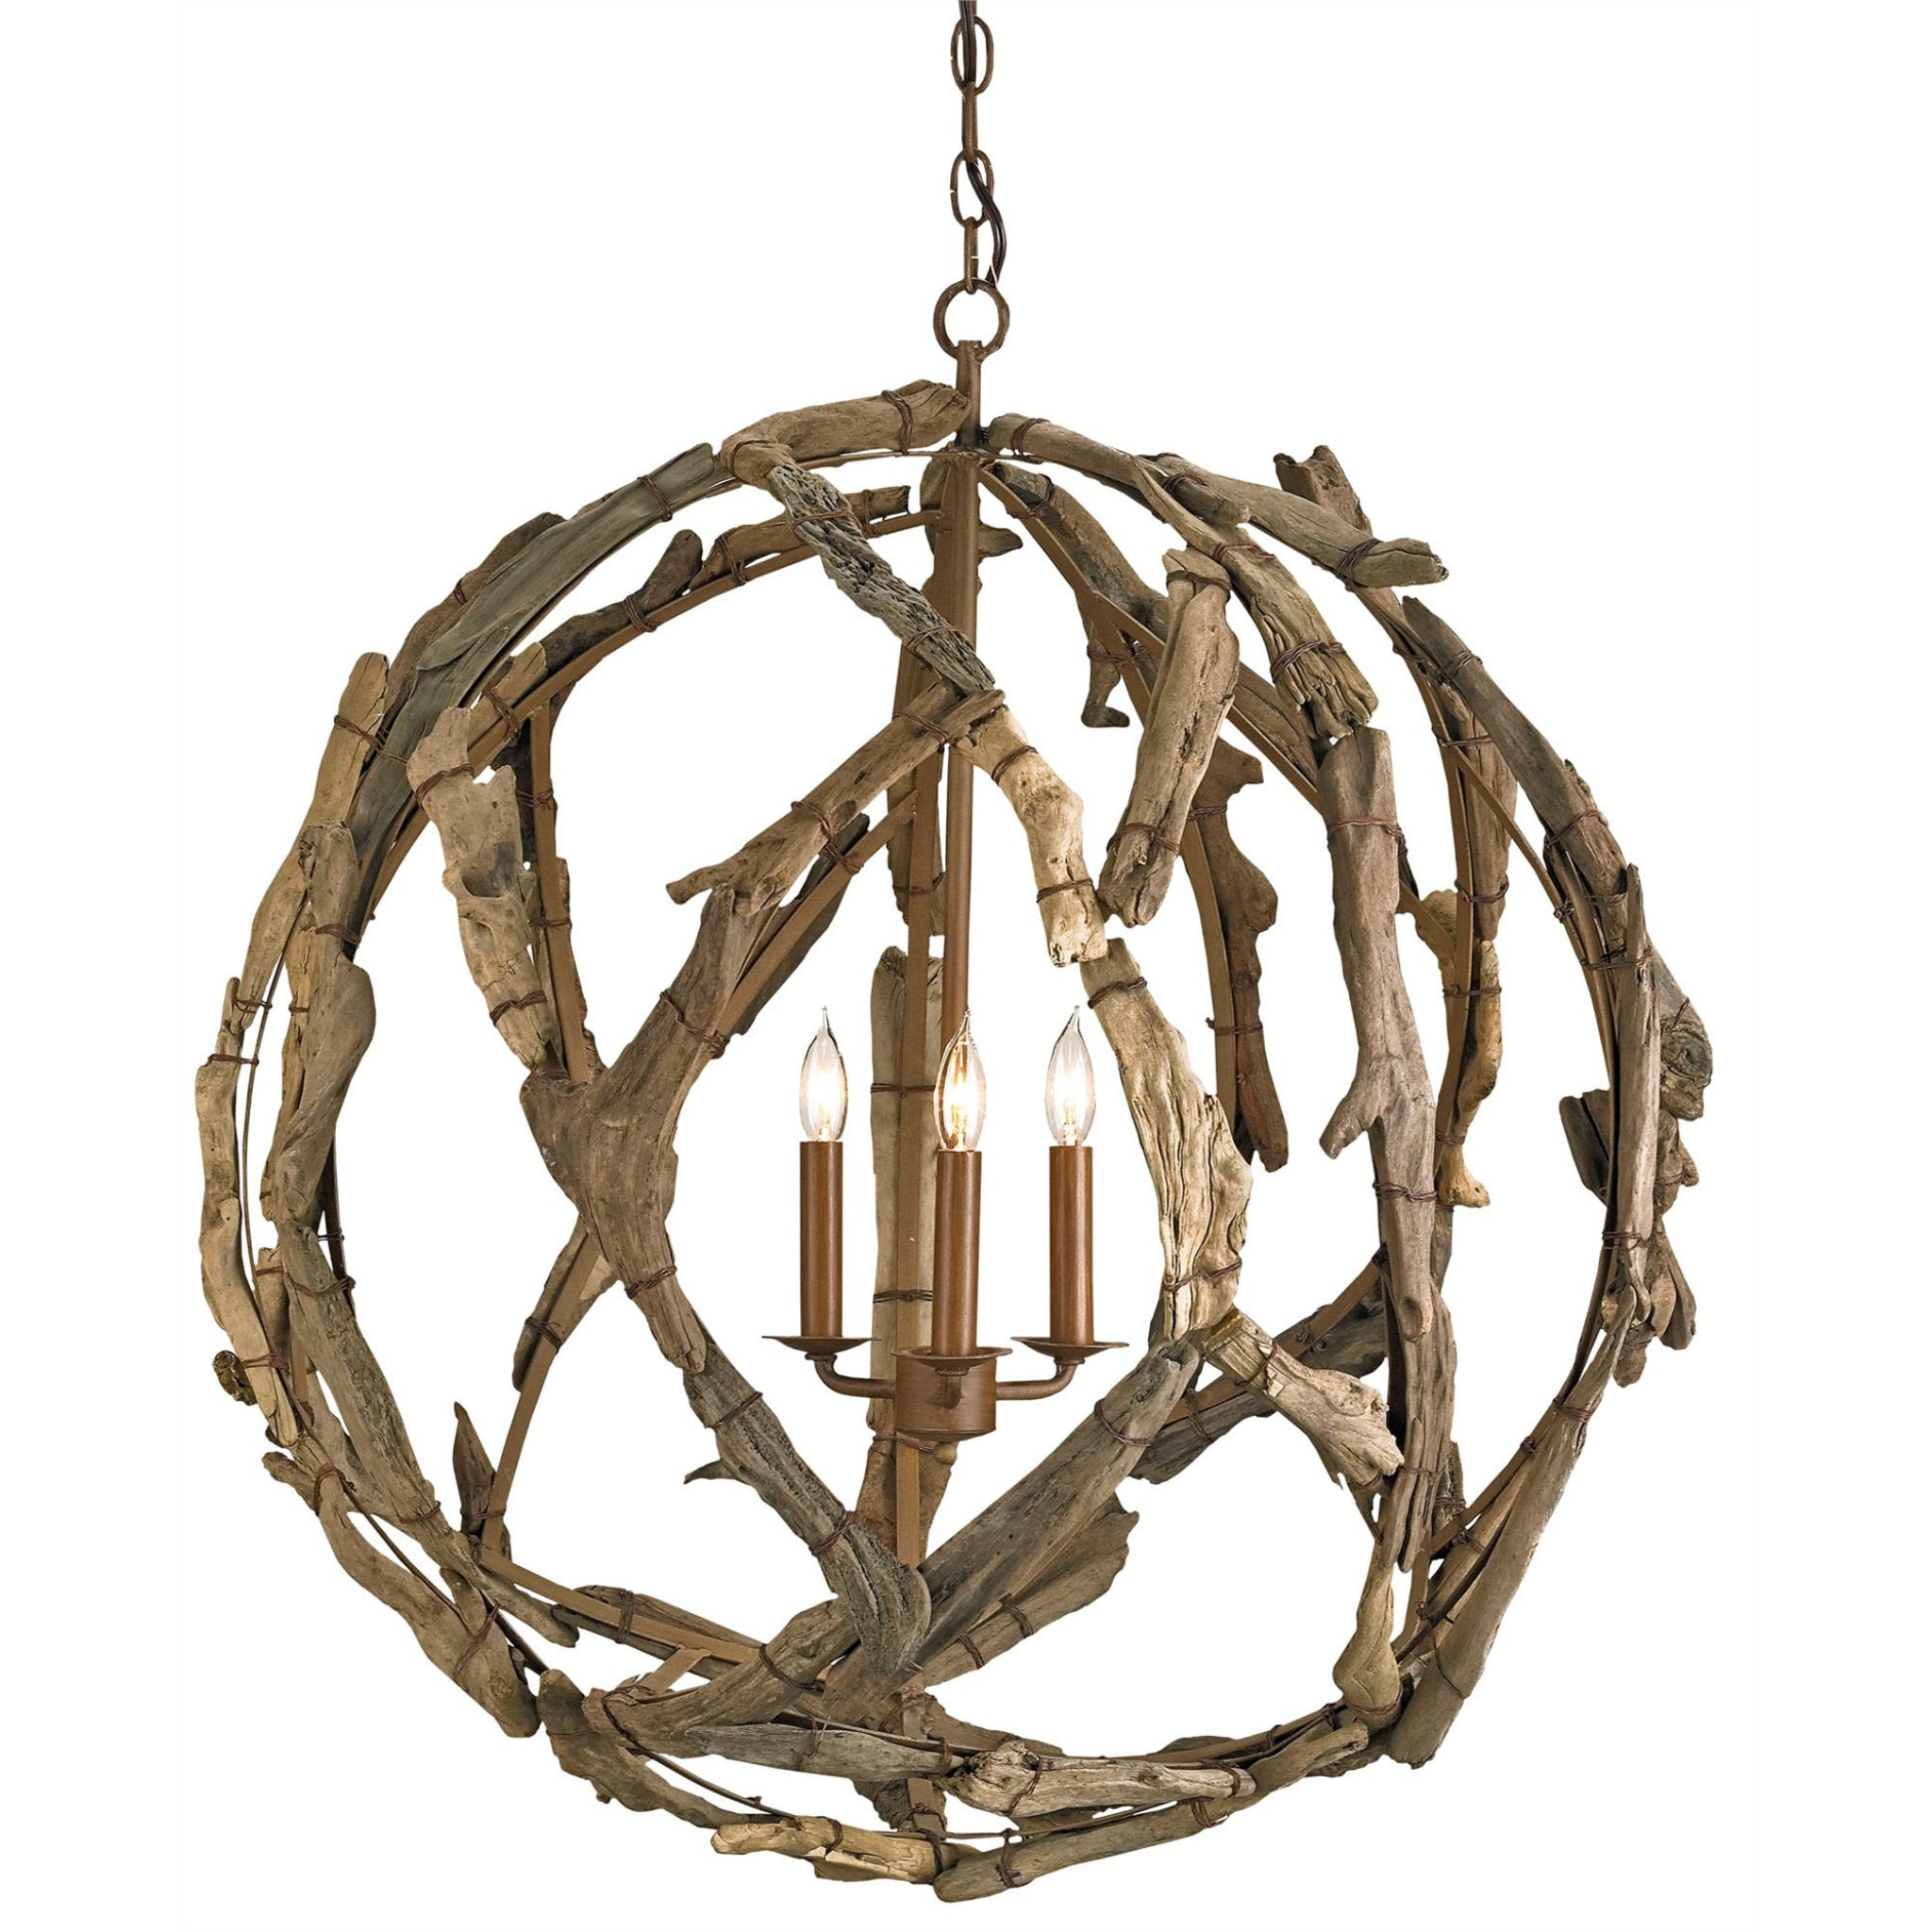 Driftwood Orb Chandelier - Natural/Washed Driftwood